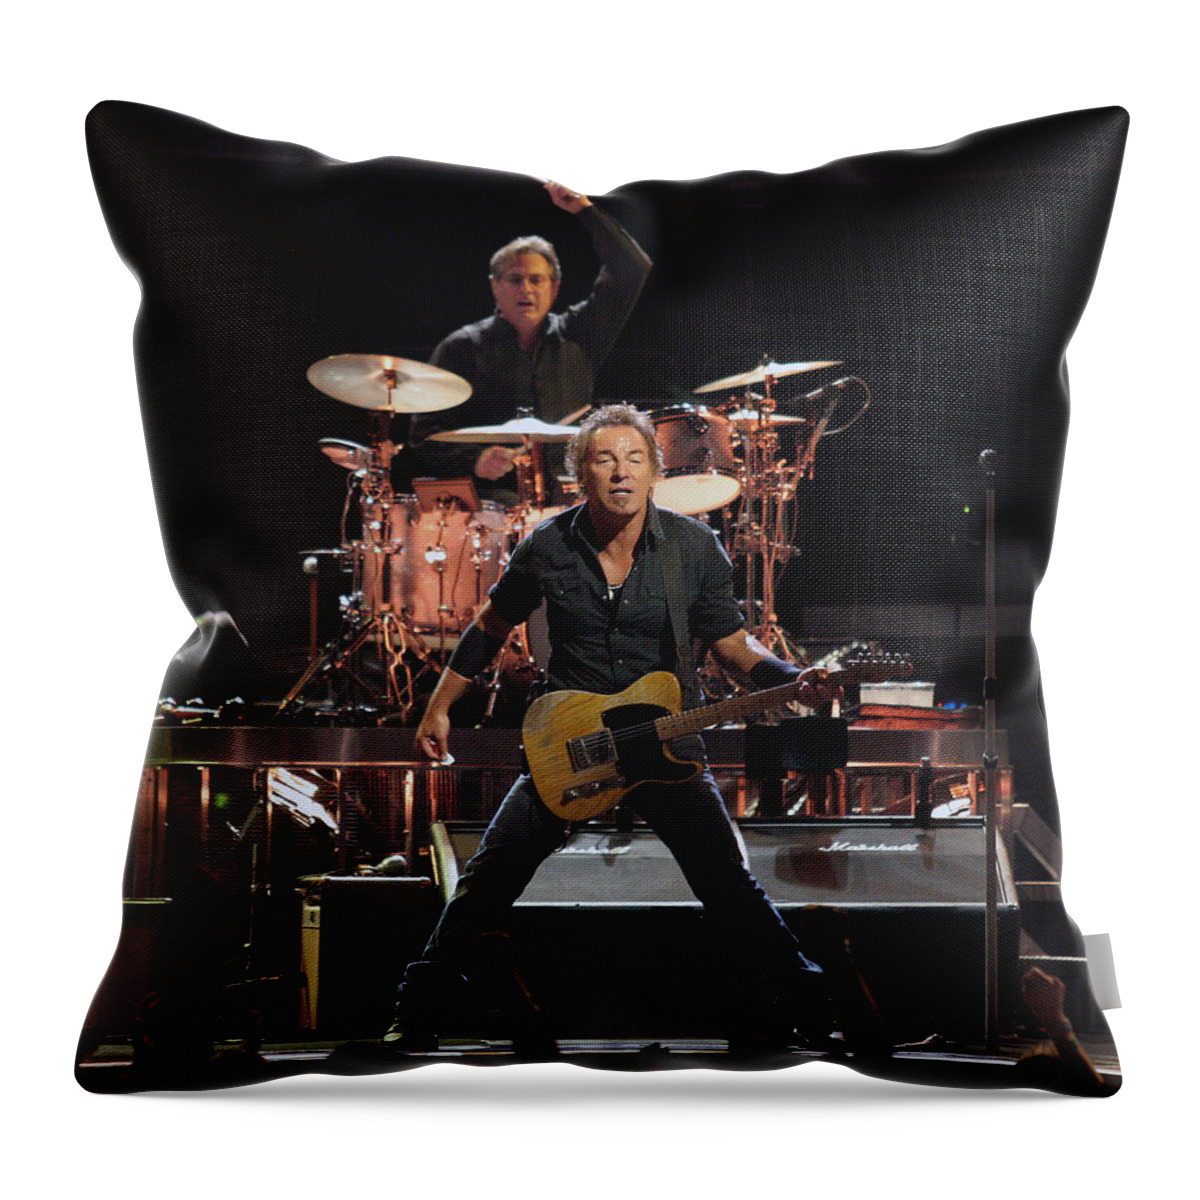 Bruce Springsteen Throw Pillow featuring the photograph Bruce Springsteen in Concert by Georgia Fowler